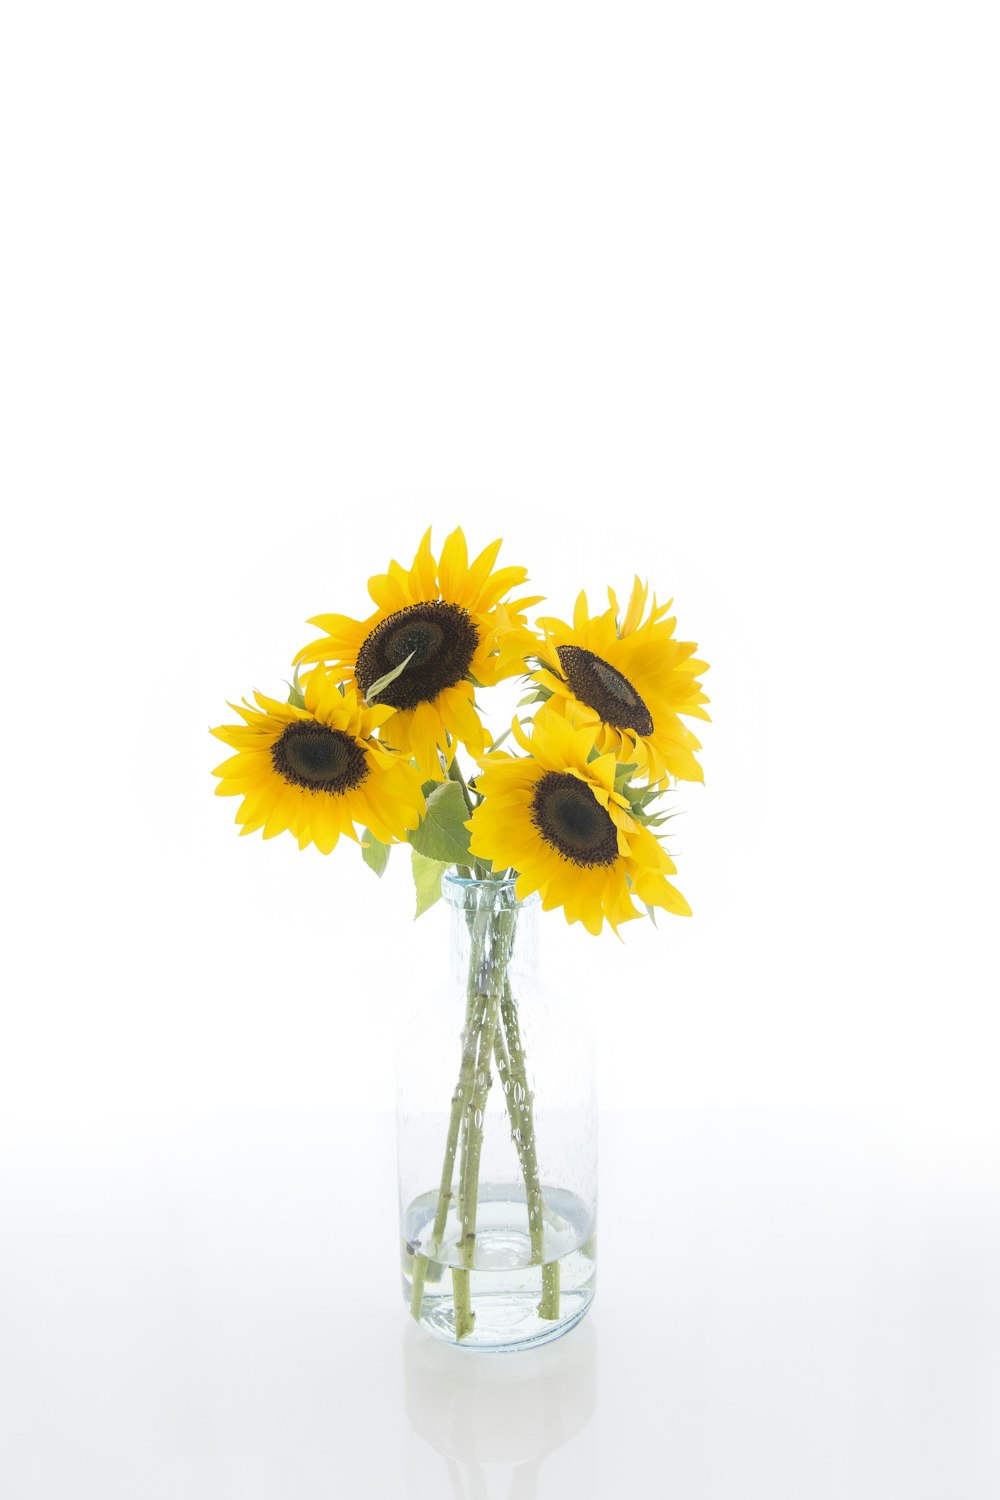 four yellow sunflowers in clear glass vase